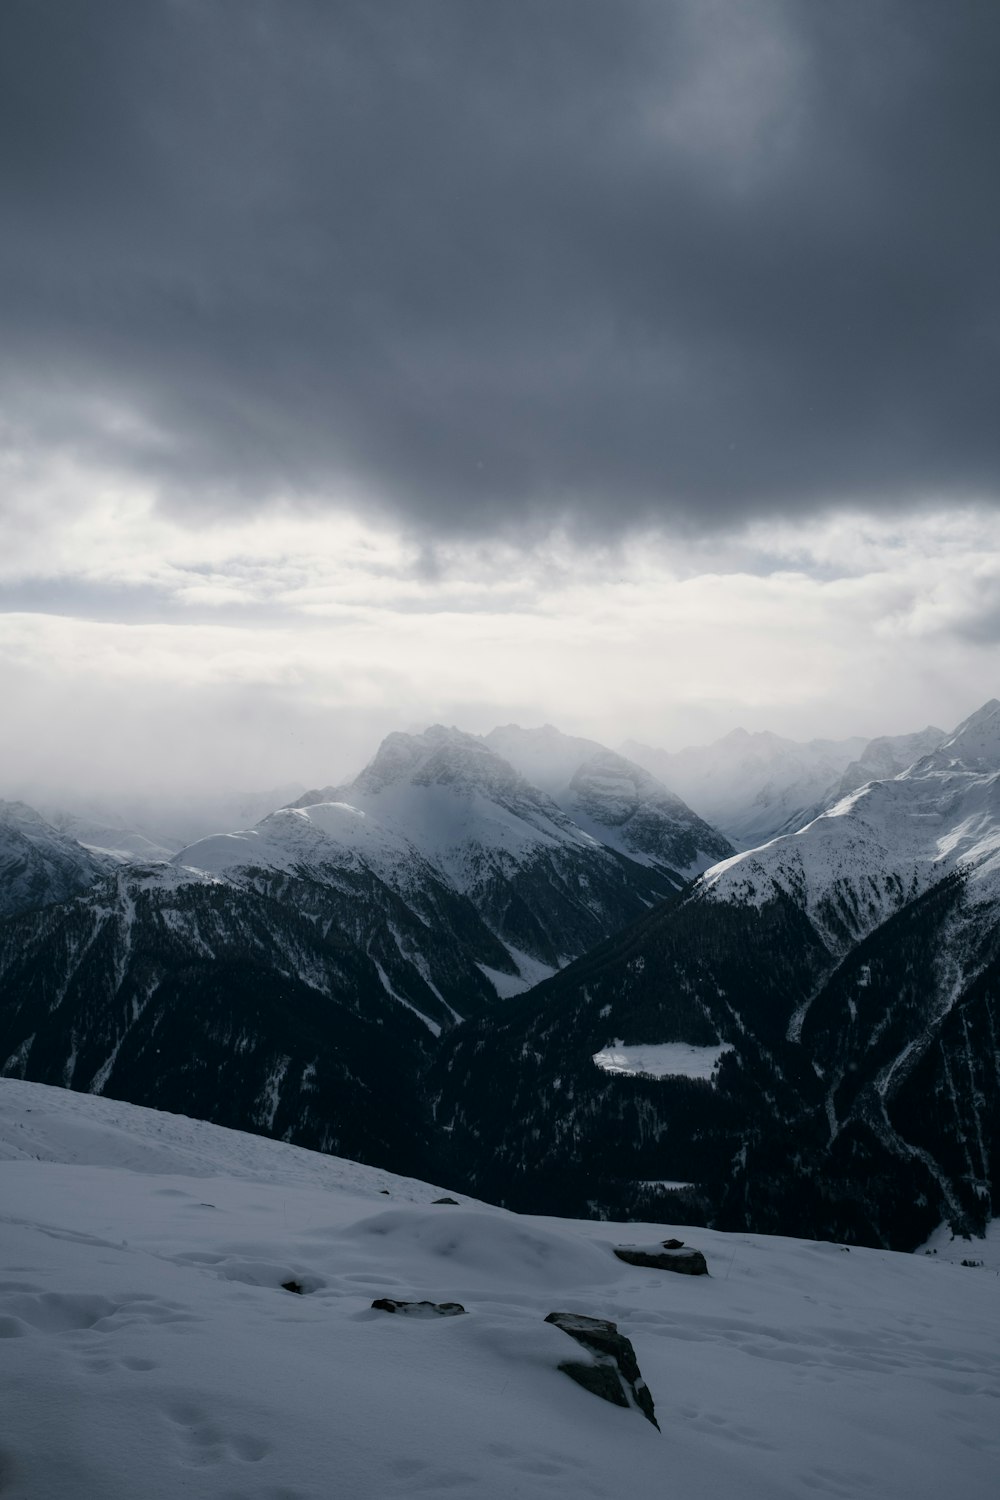 a view of a snowy mountain range under a cloudy sky